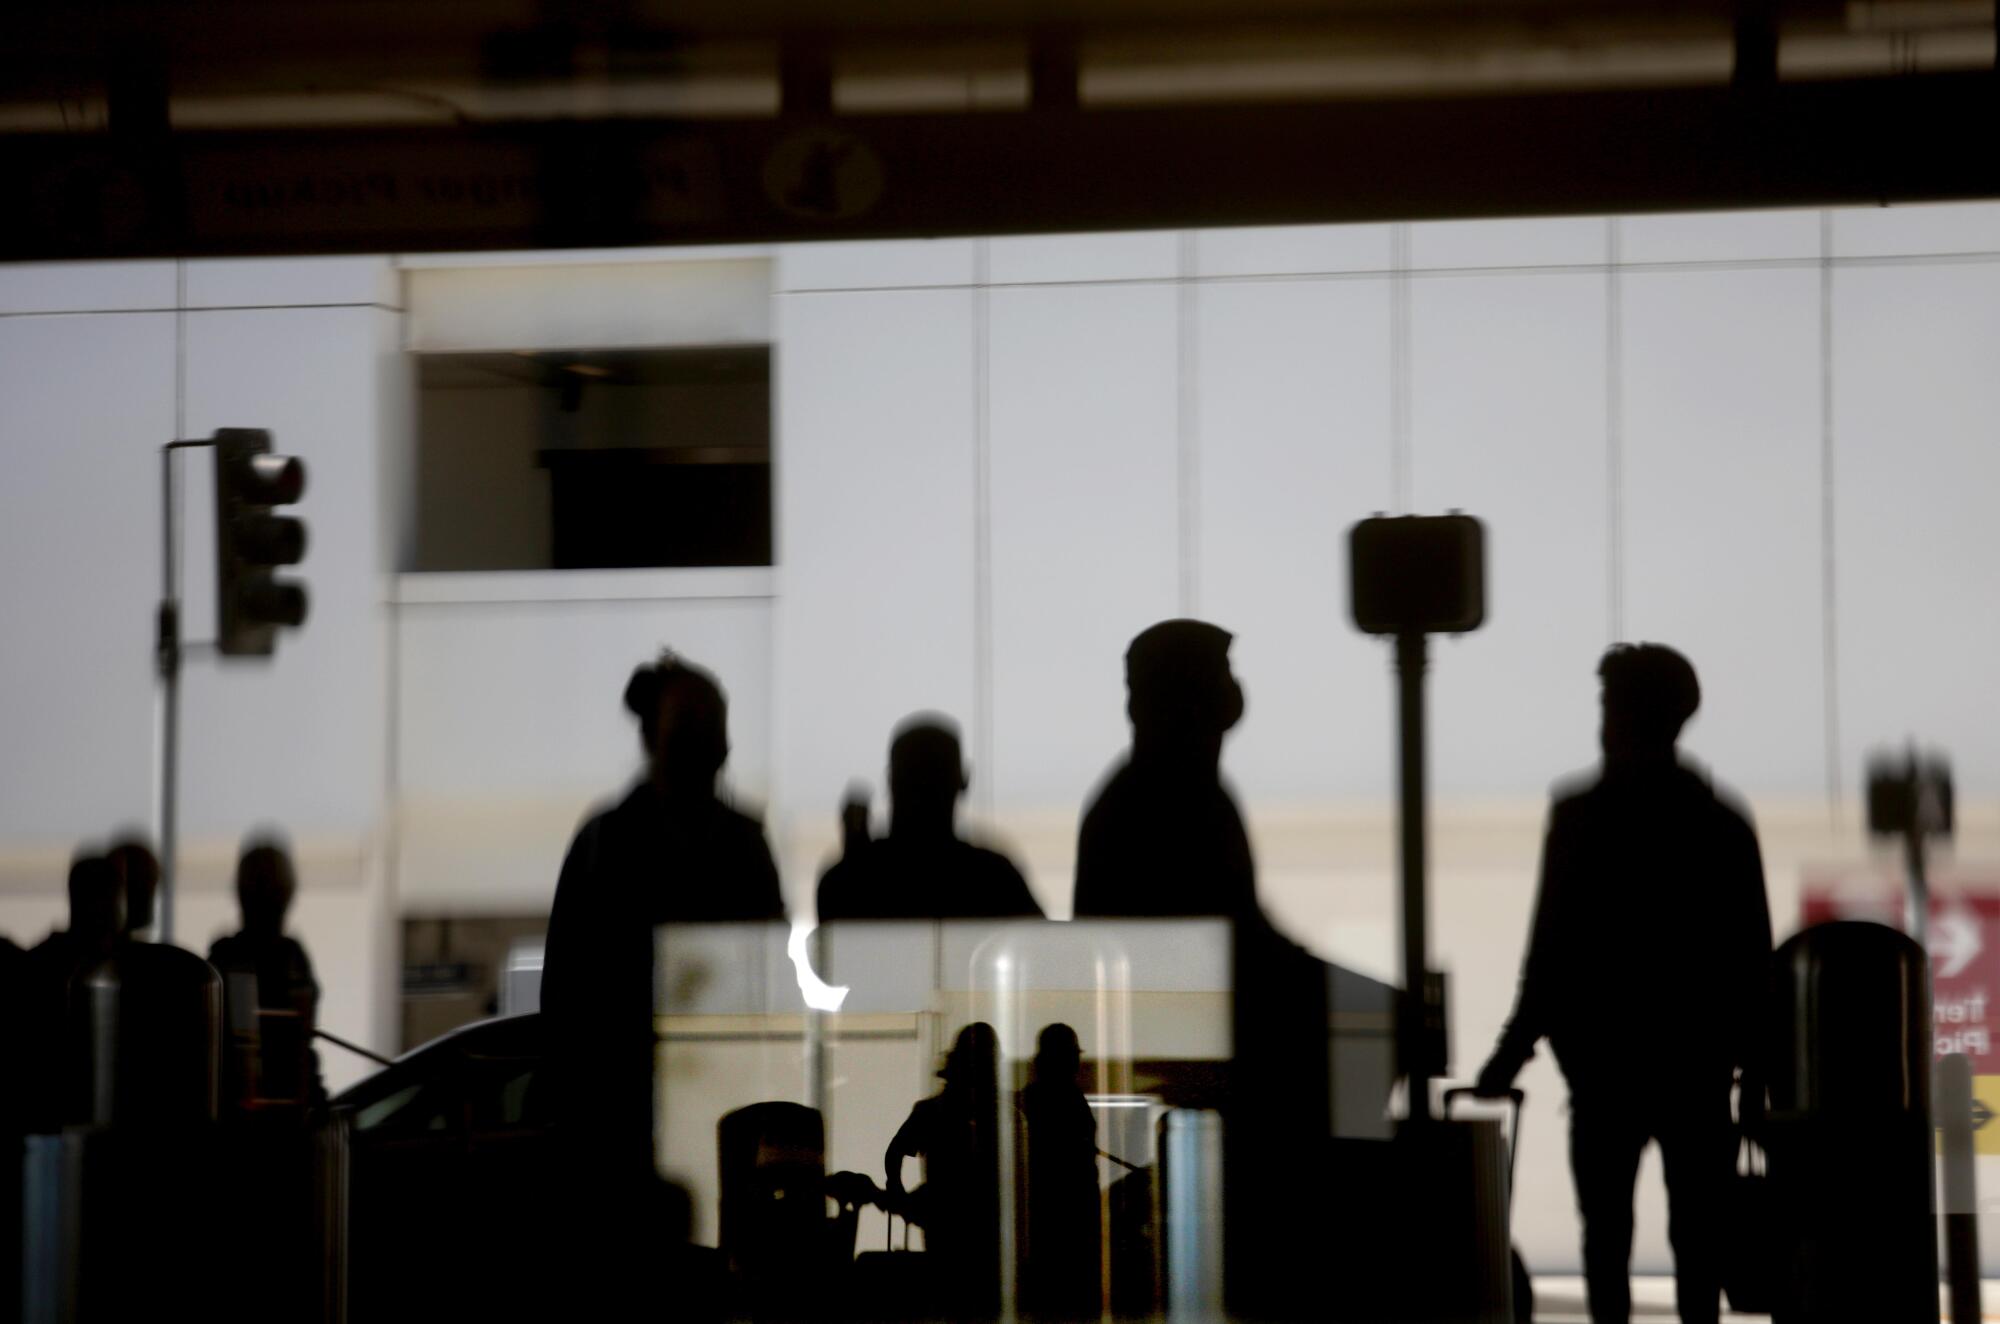 Travelers are seen in silhouette.